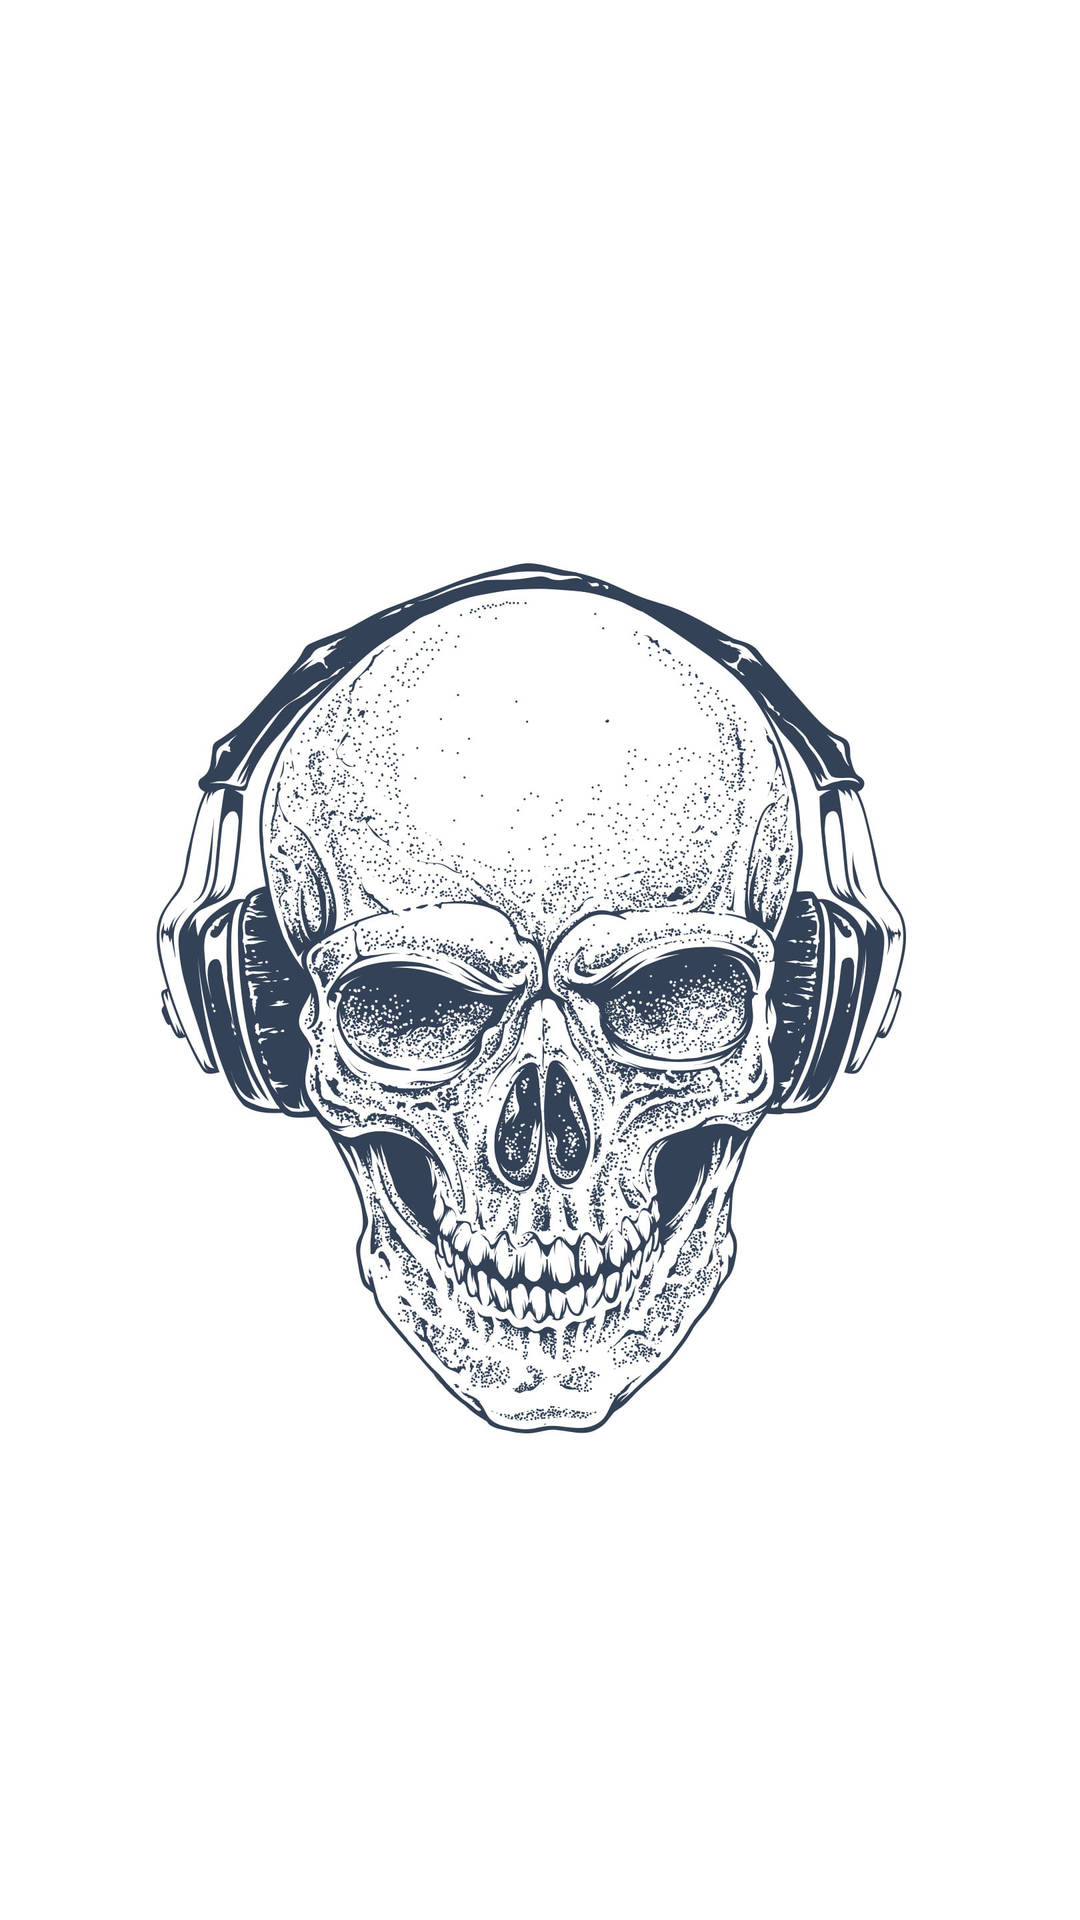 Skull with headphones vector collection download free cdr eps